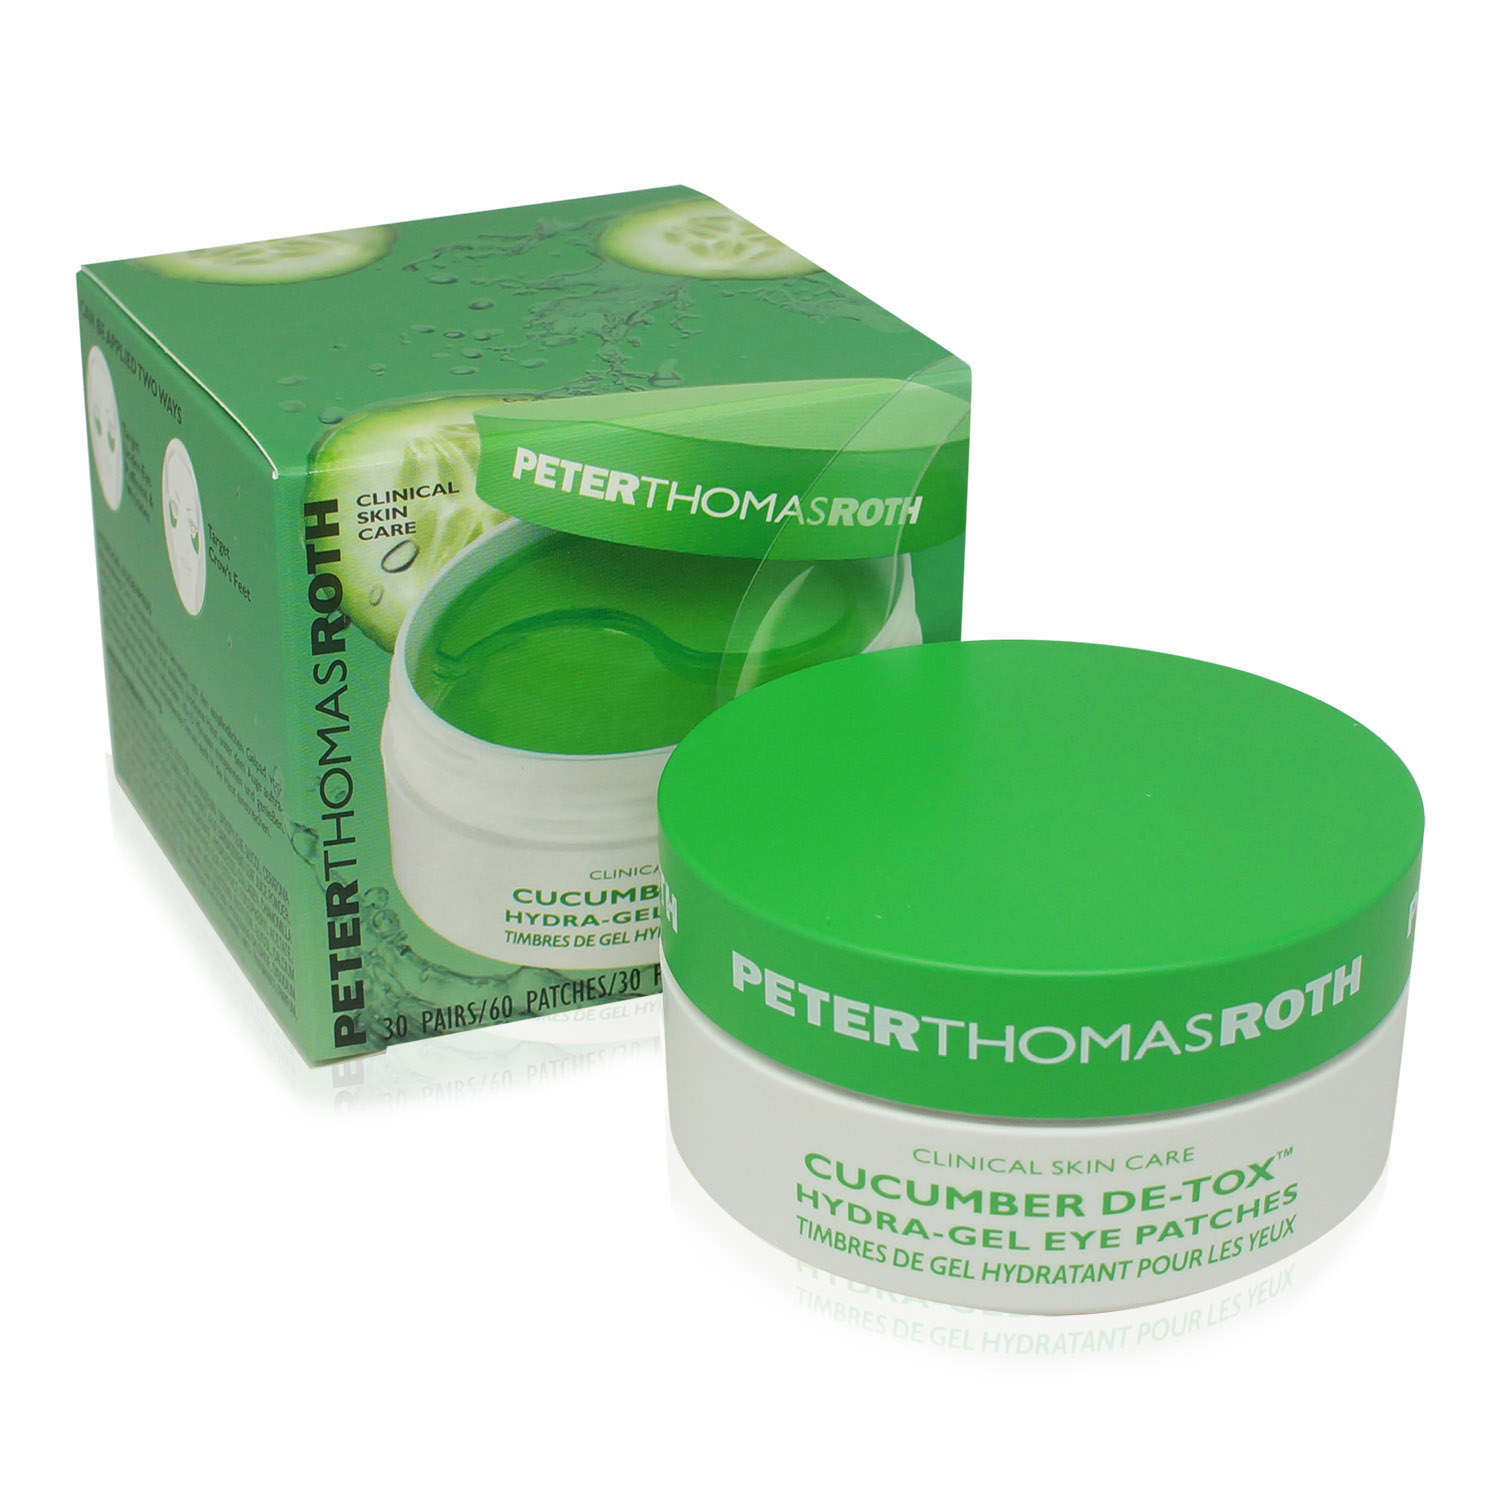 Cucumber De-Tox Hydra-Gel Eye Patches by Peter Thomas Roth for Unisex - 60 Pc Patches - image 3 of 3